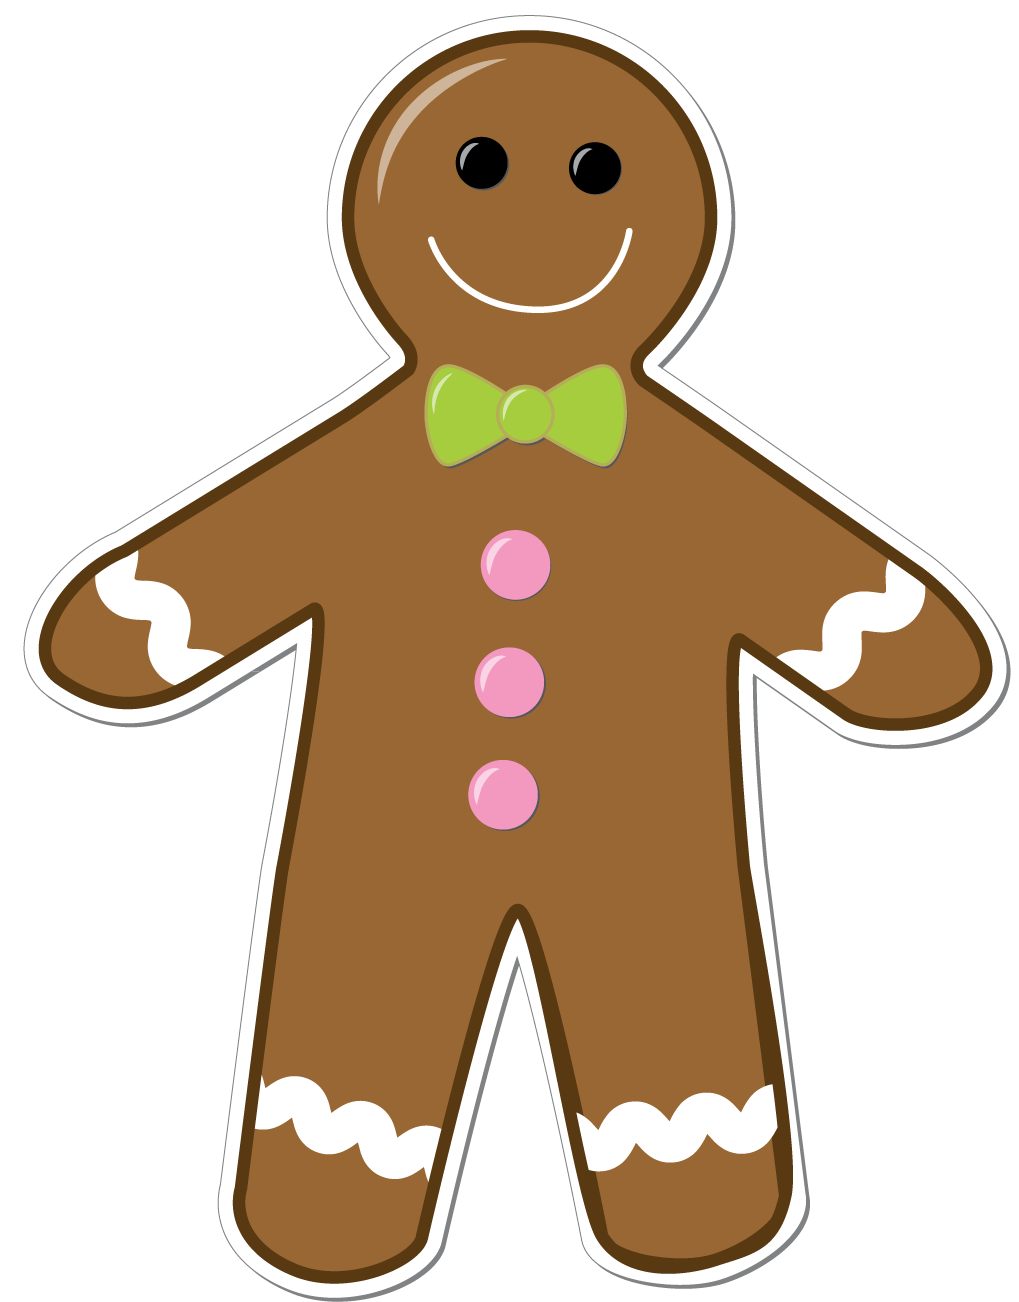 Gingerbread Man 3 Clipart Fre